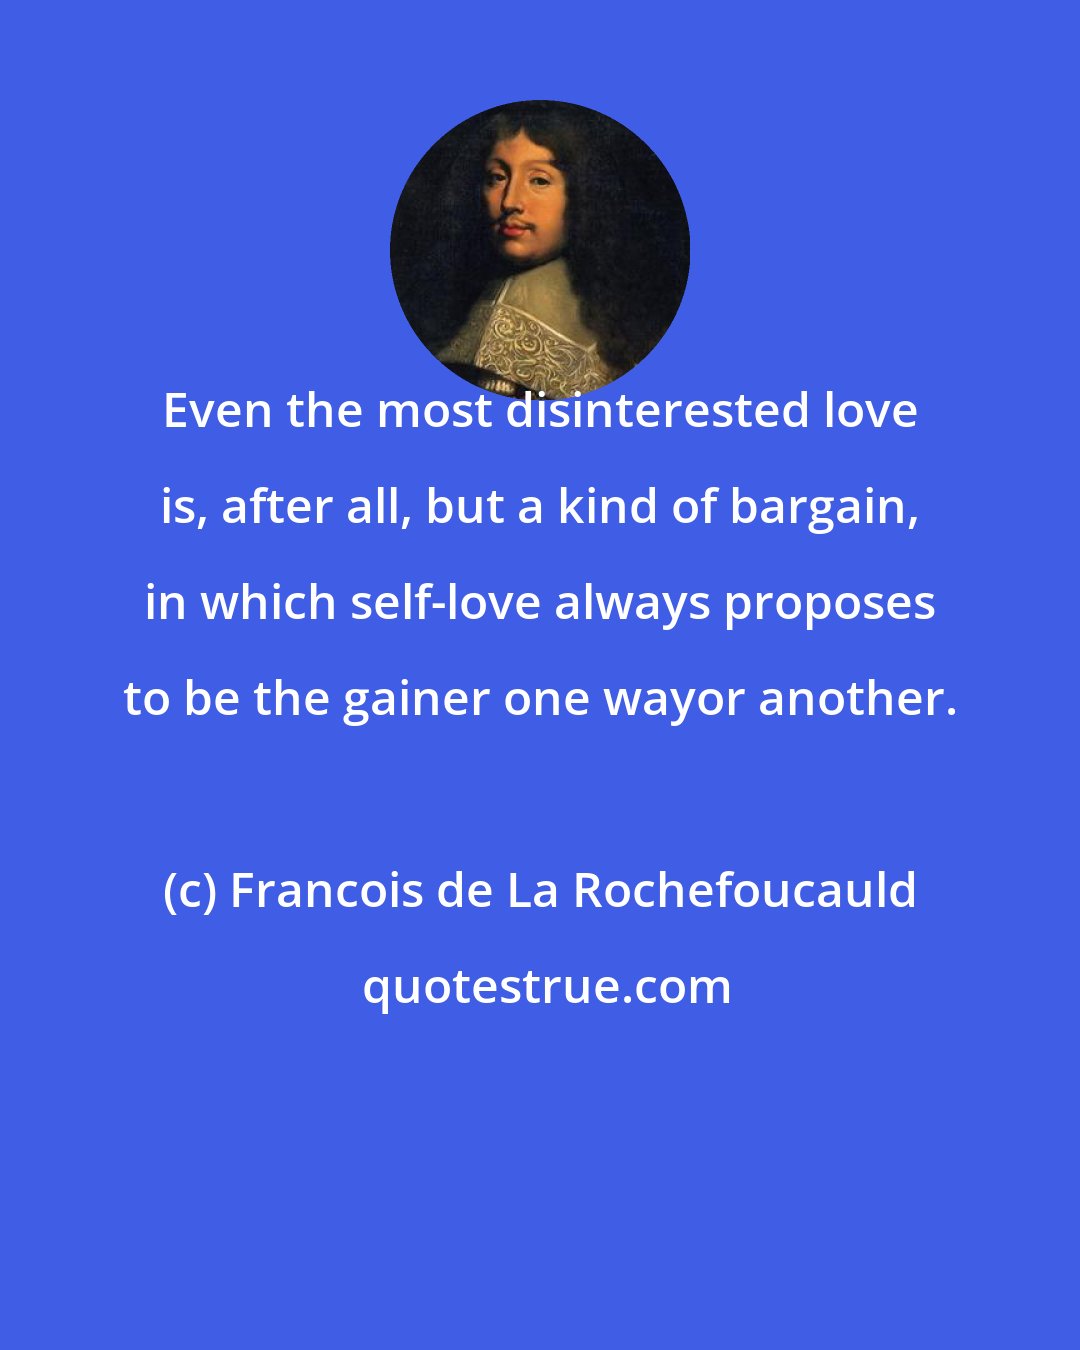 Francois de La Rochefoucauld: Even the most disinterested love is, after all, but a kind of bargain, in which self-love always proposes to be the gainer one wayor another.